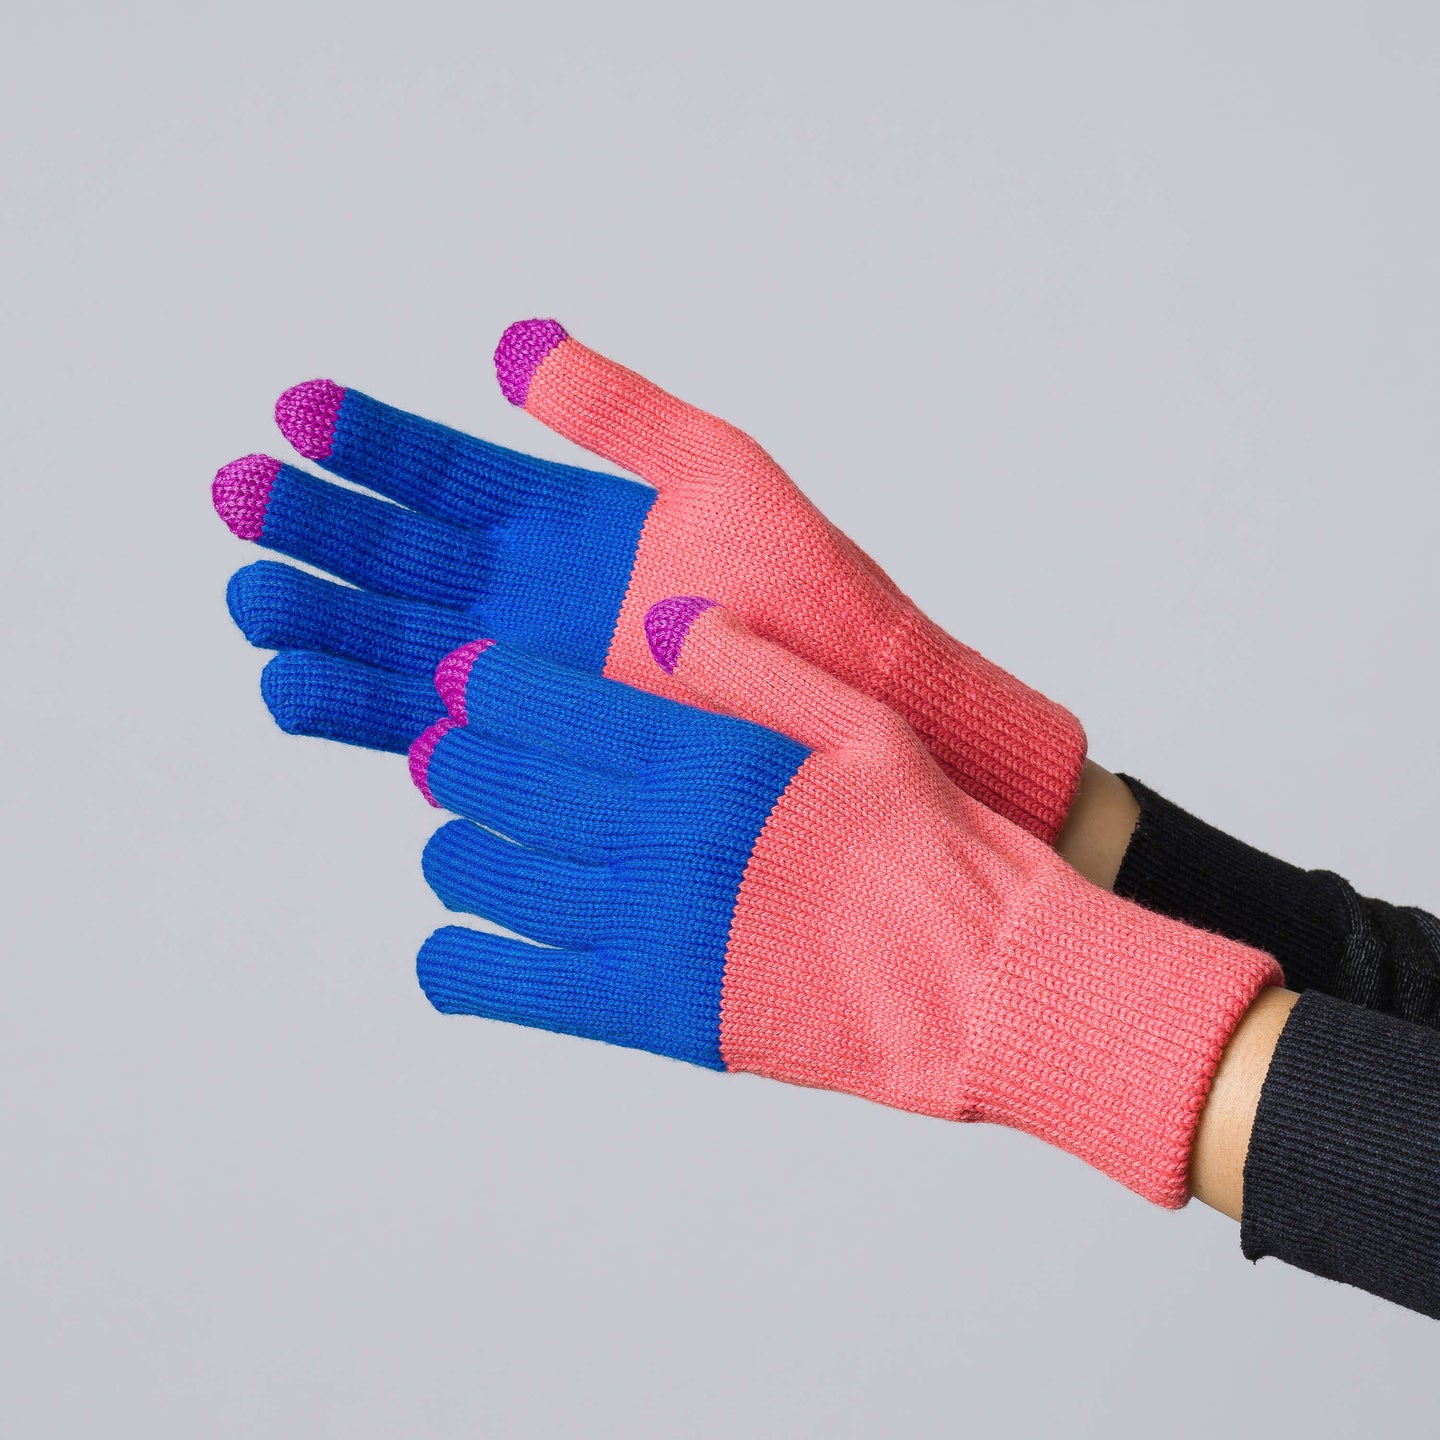 Colorblock Knit Touchscreen One Size Unisex Glove Colorful Fingertips Colorful Holiday Gift